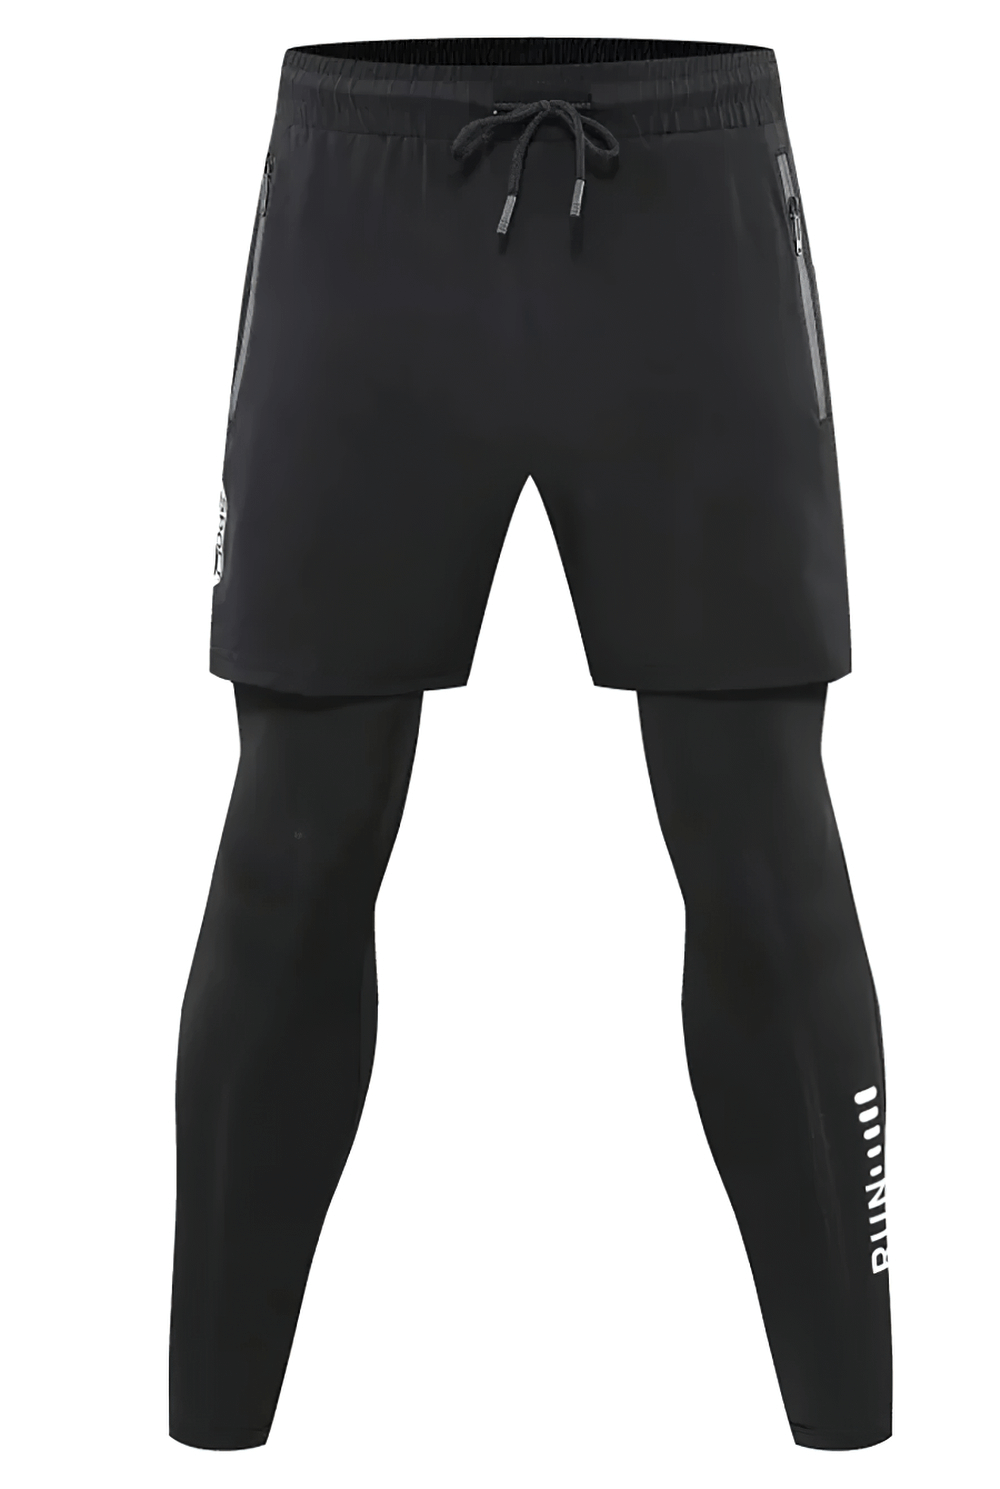 Athletic 2-in-1 Shorts and Tights for Performance - SF2129